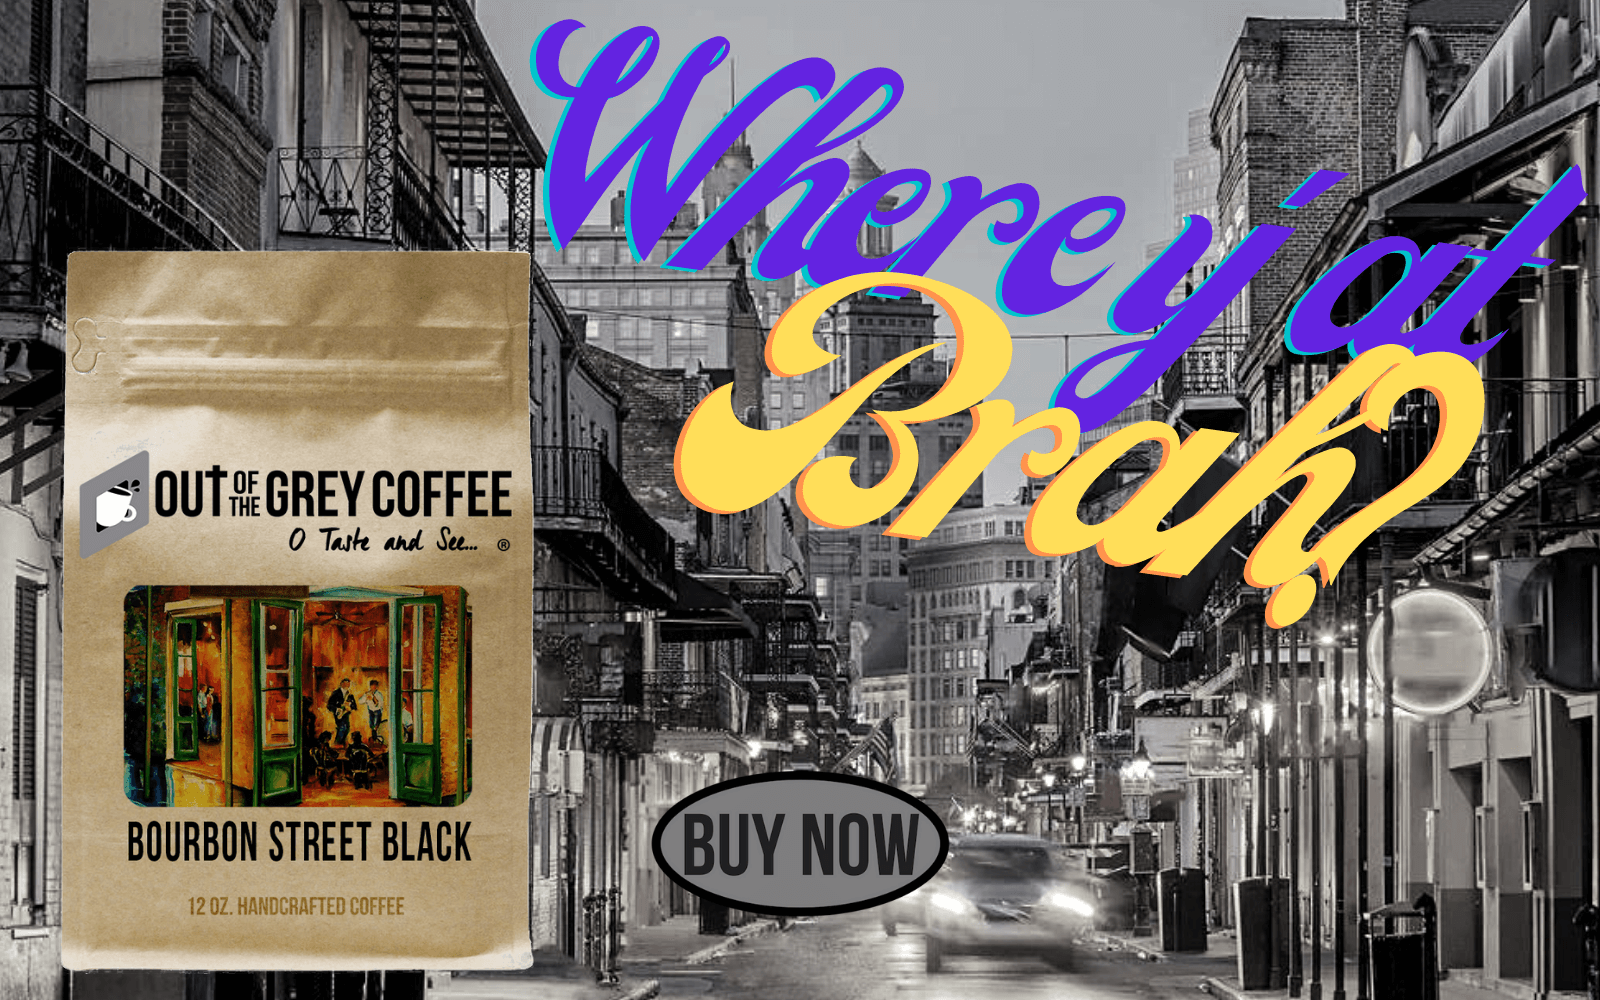 Where y at brah Bourbon street black coffee from Out Of The Grey Coffee